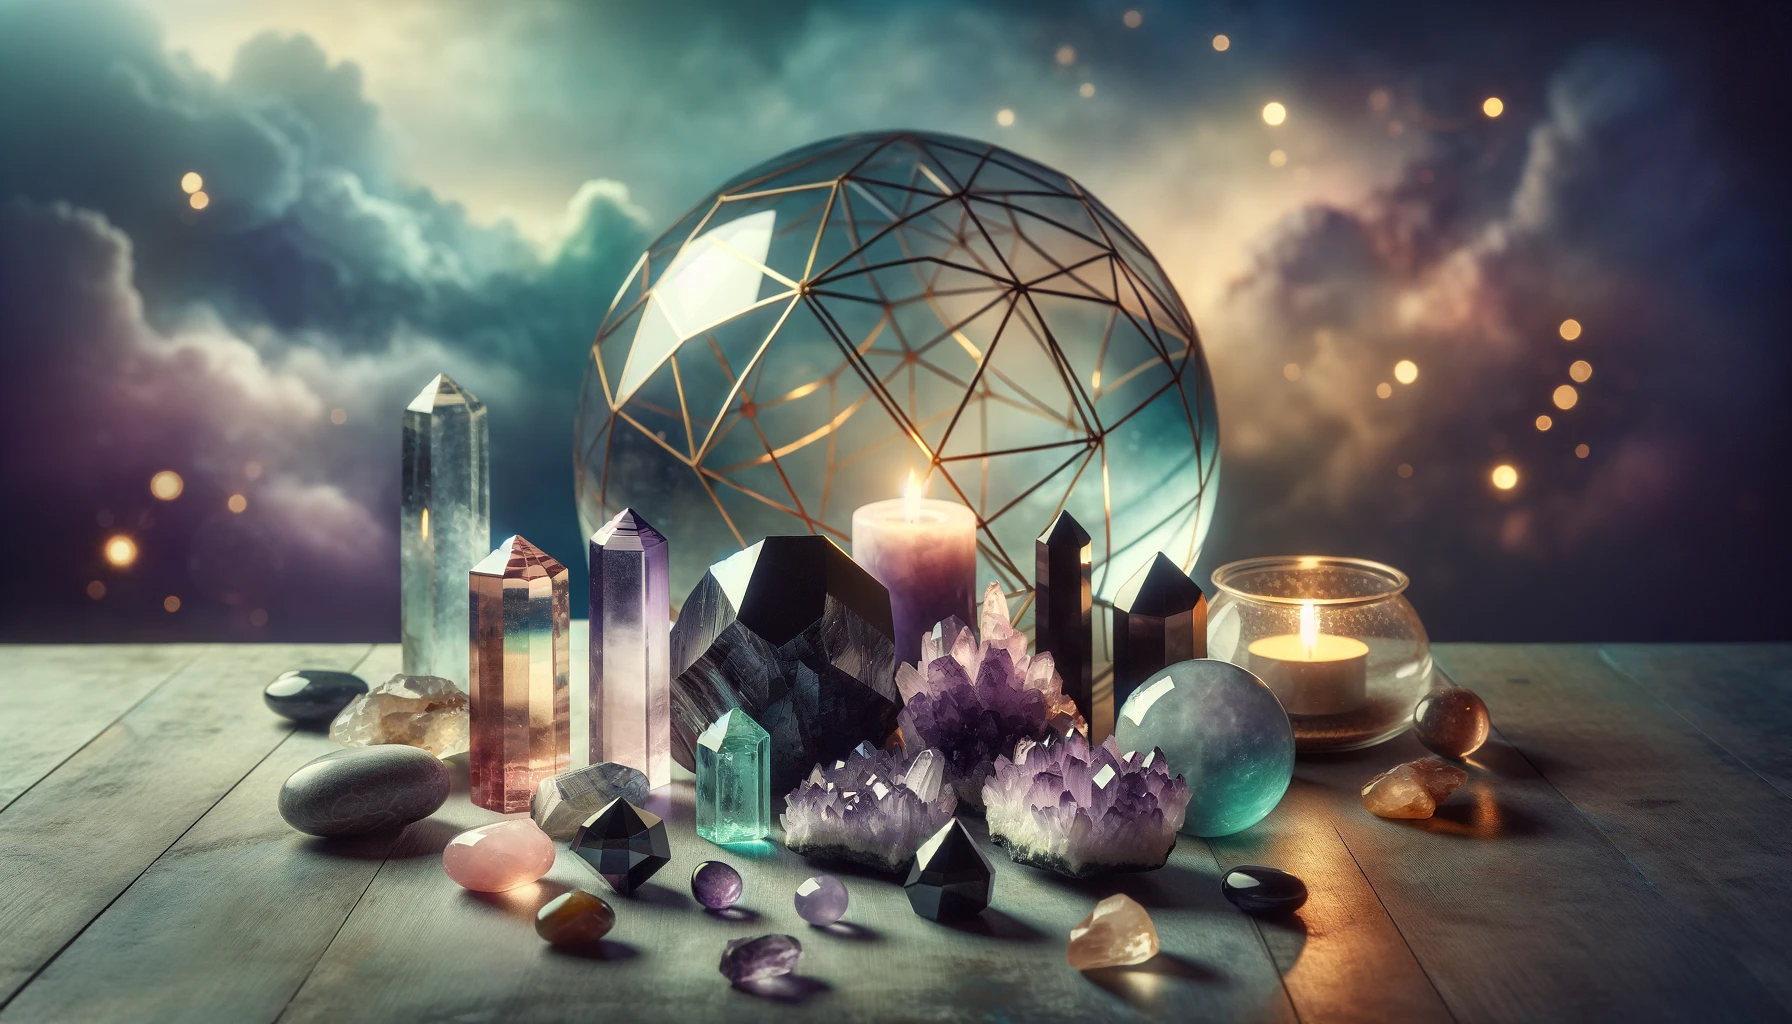 ·E 2023 12 04 11.34.46   A serene and mystical image featuring an assortment of protective crystals like Black Tourmaline, Amethyst, and Citrine, artistically arranged against.png